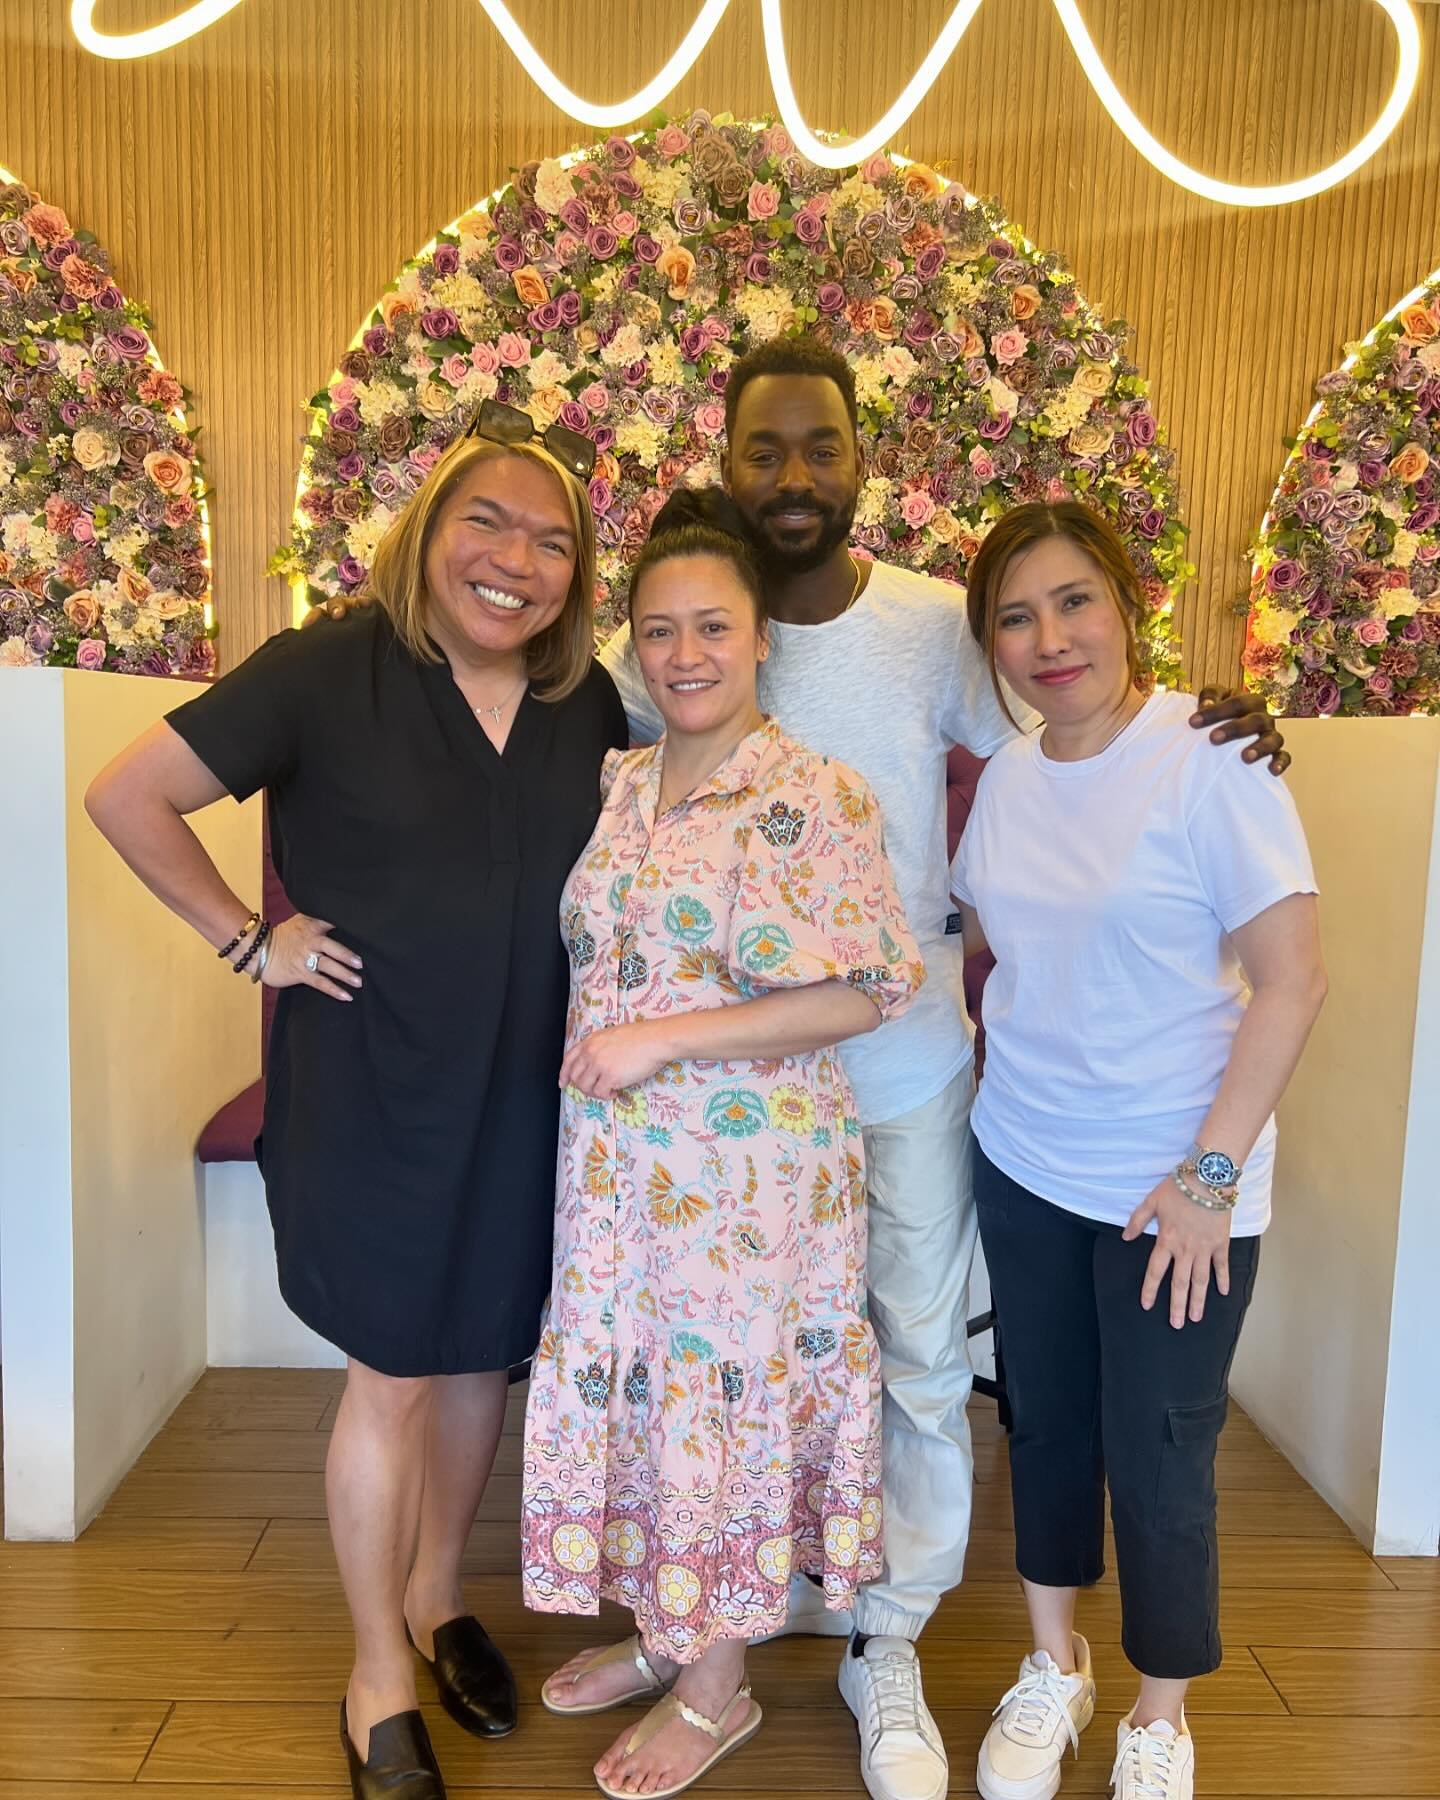 Our future bride and groom all the way from Netherlands. ❤️ Thank you for dropping by out store for your Cake Tasting and for booking with us. We are excited for your wedding day. ❤️ @loivillarama